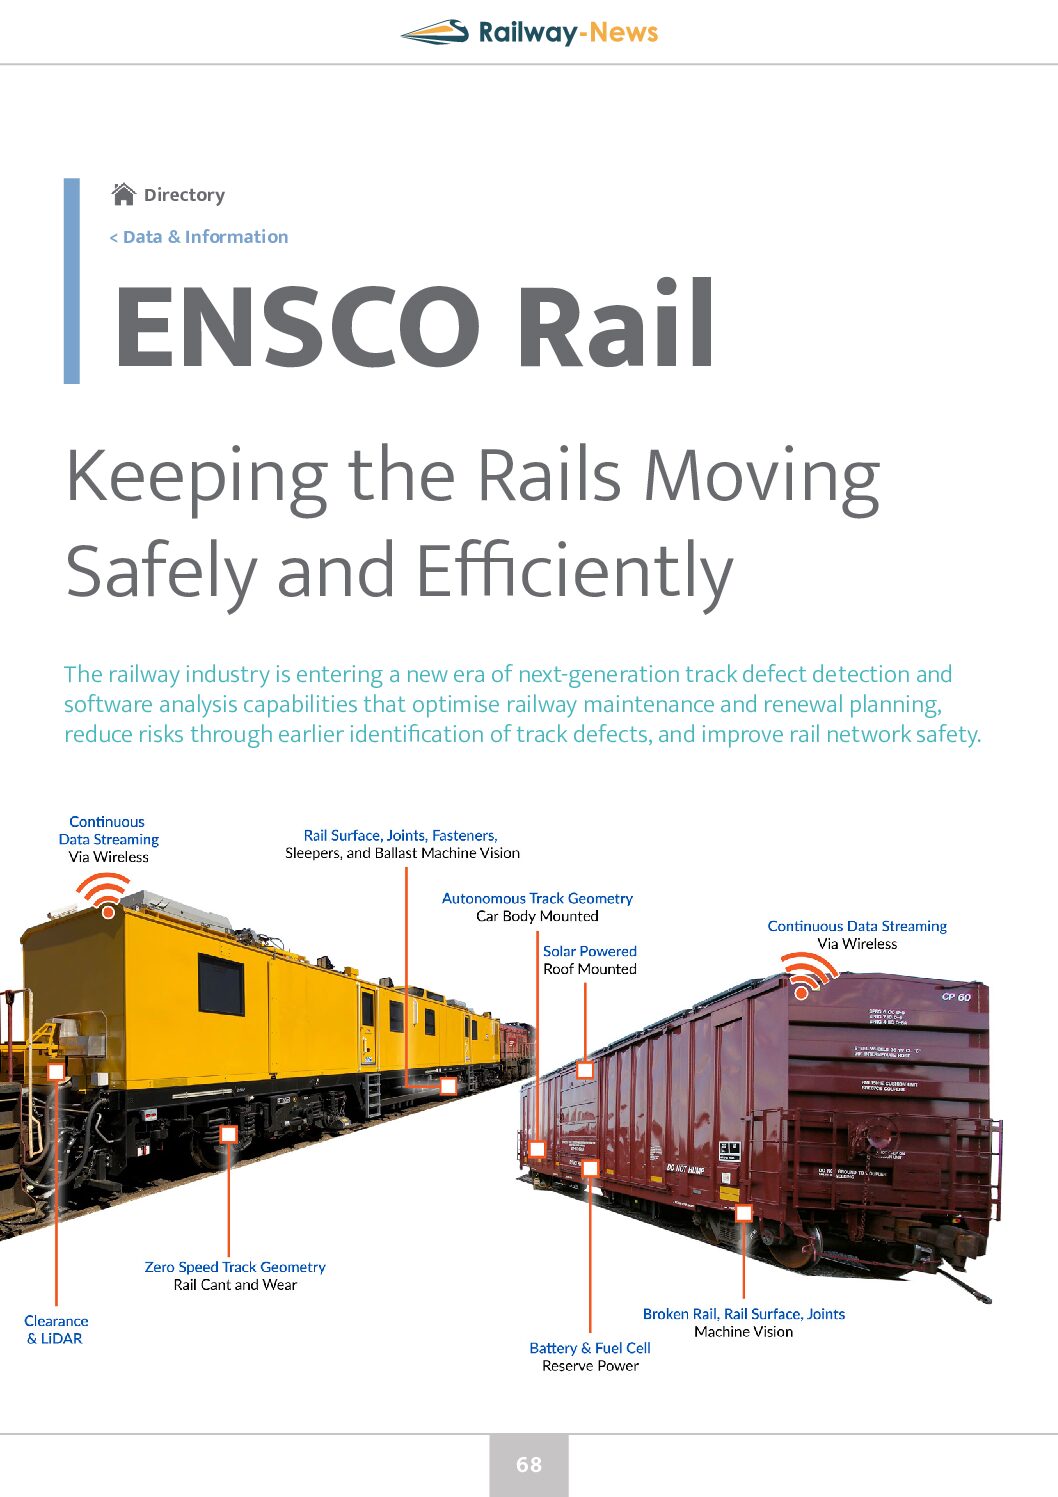 Keeping the Rails Moving Safely and Efficiently